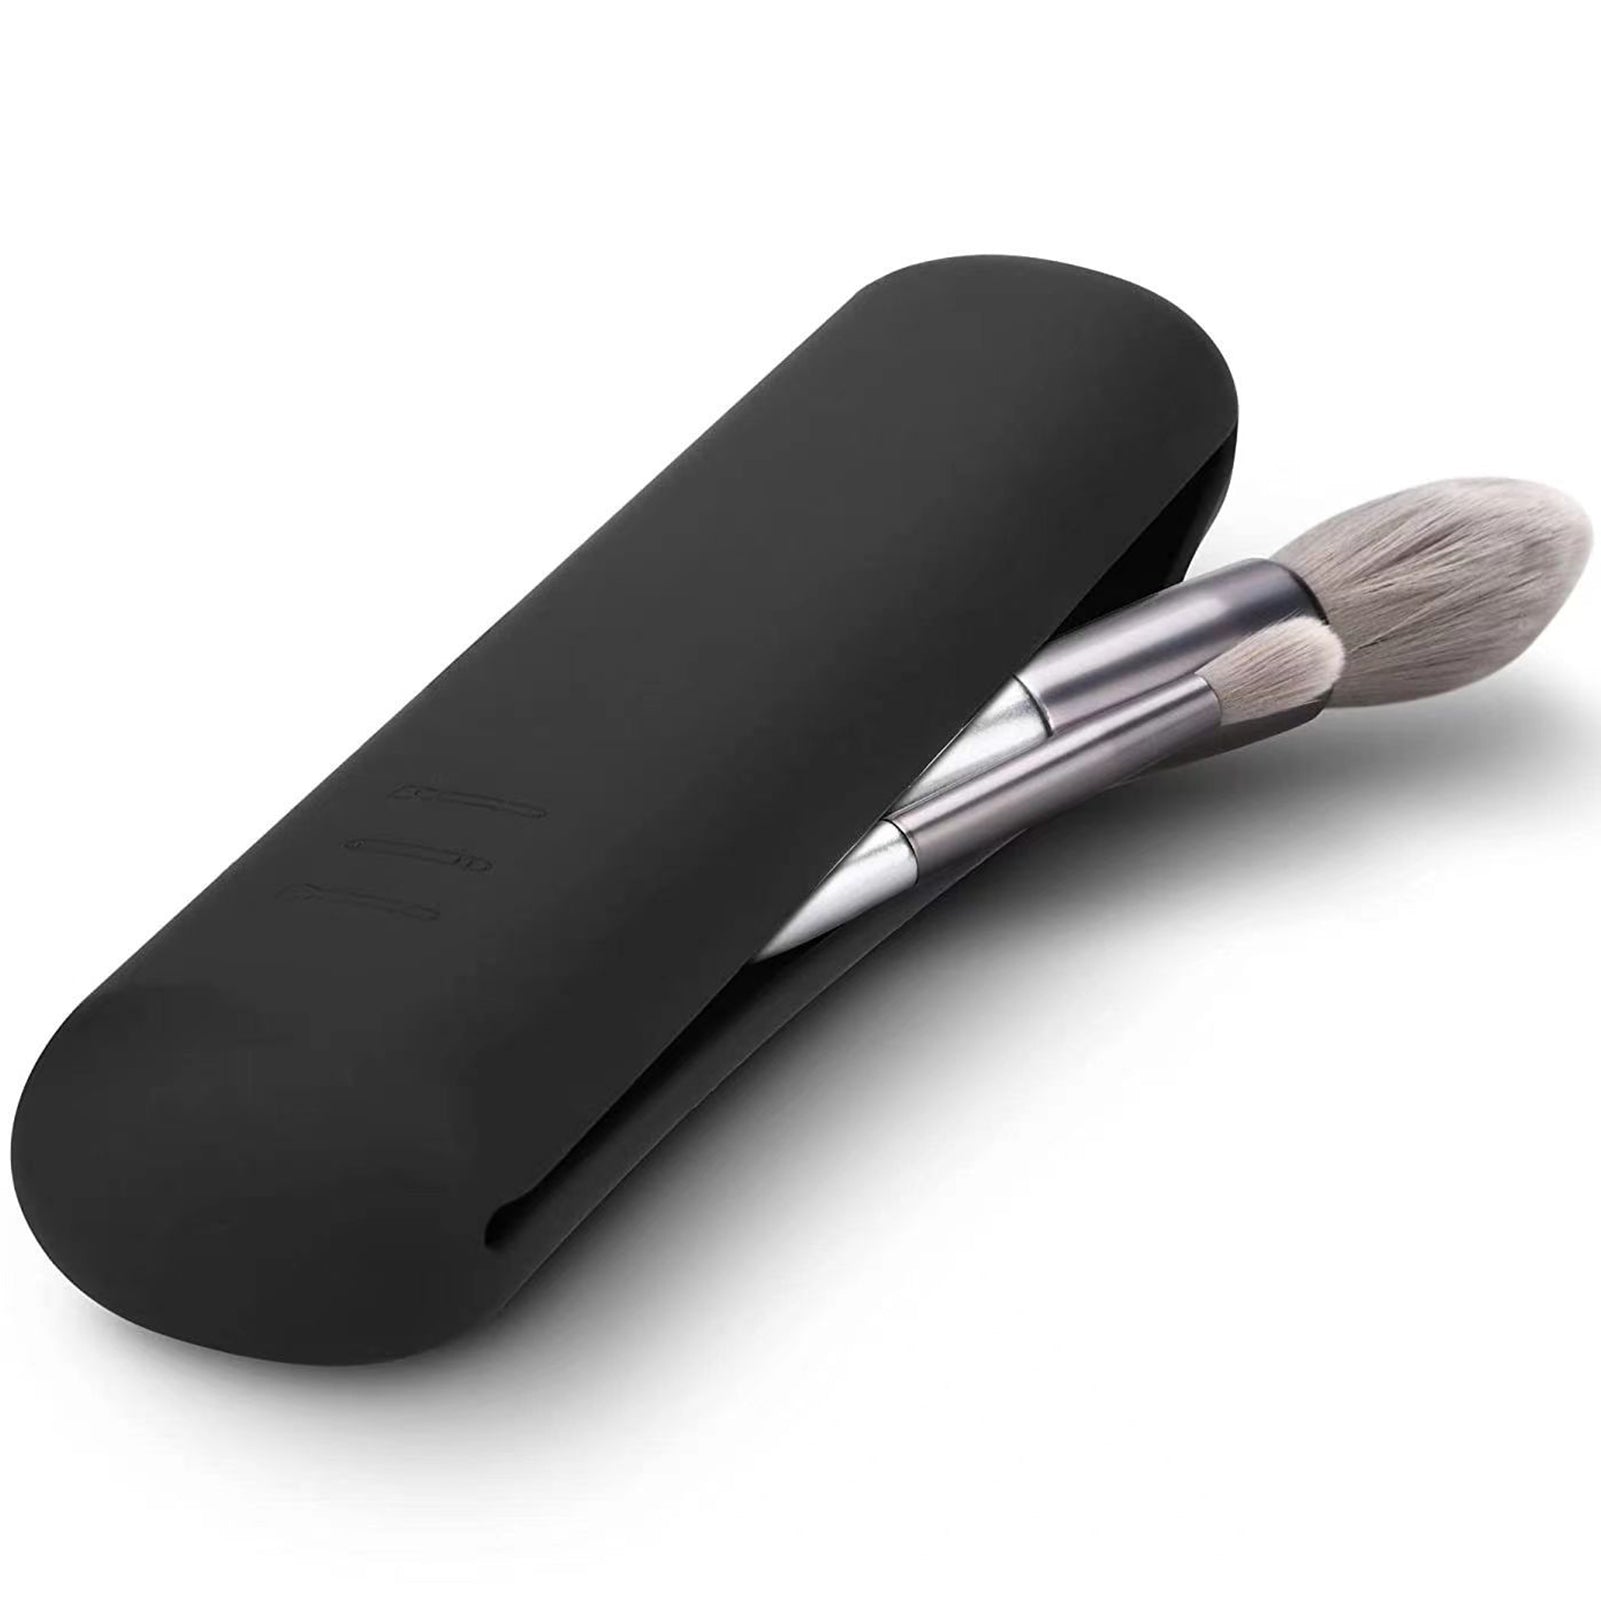 “Effortless Makeup Application: The Hypoallergenic Silicone Makeup Brush Case for Clean, Organized, and Hassle-Free Beauty Routine”